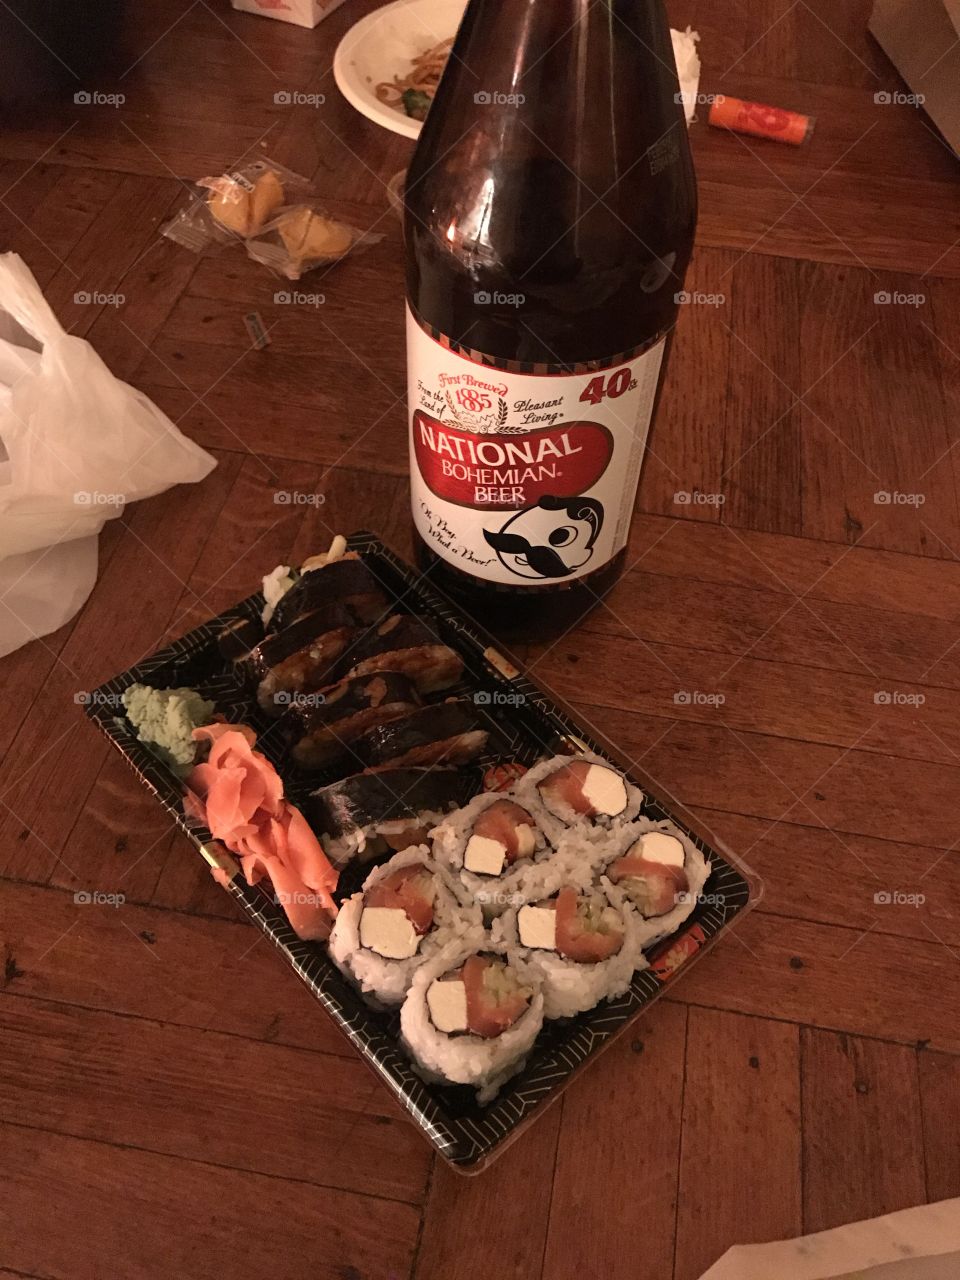 Baltimore life. Sushi and a forty on the floor. New apartment, happy meals.